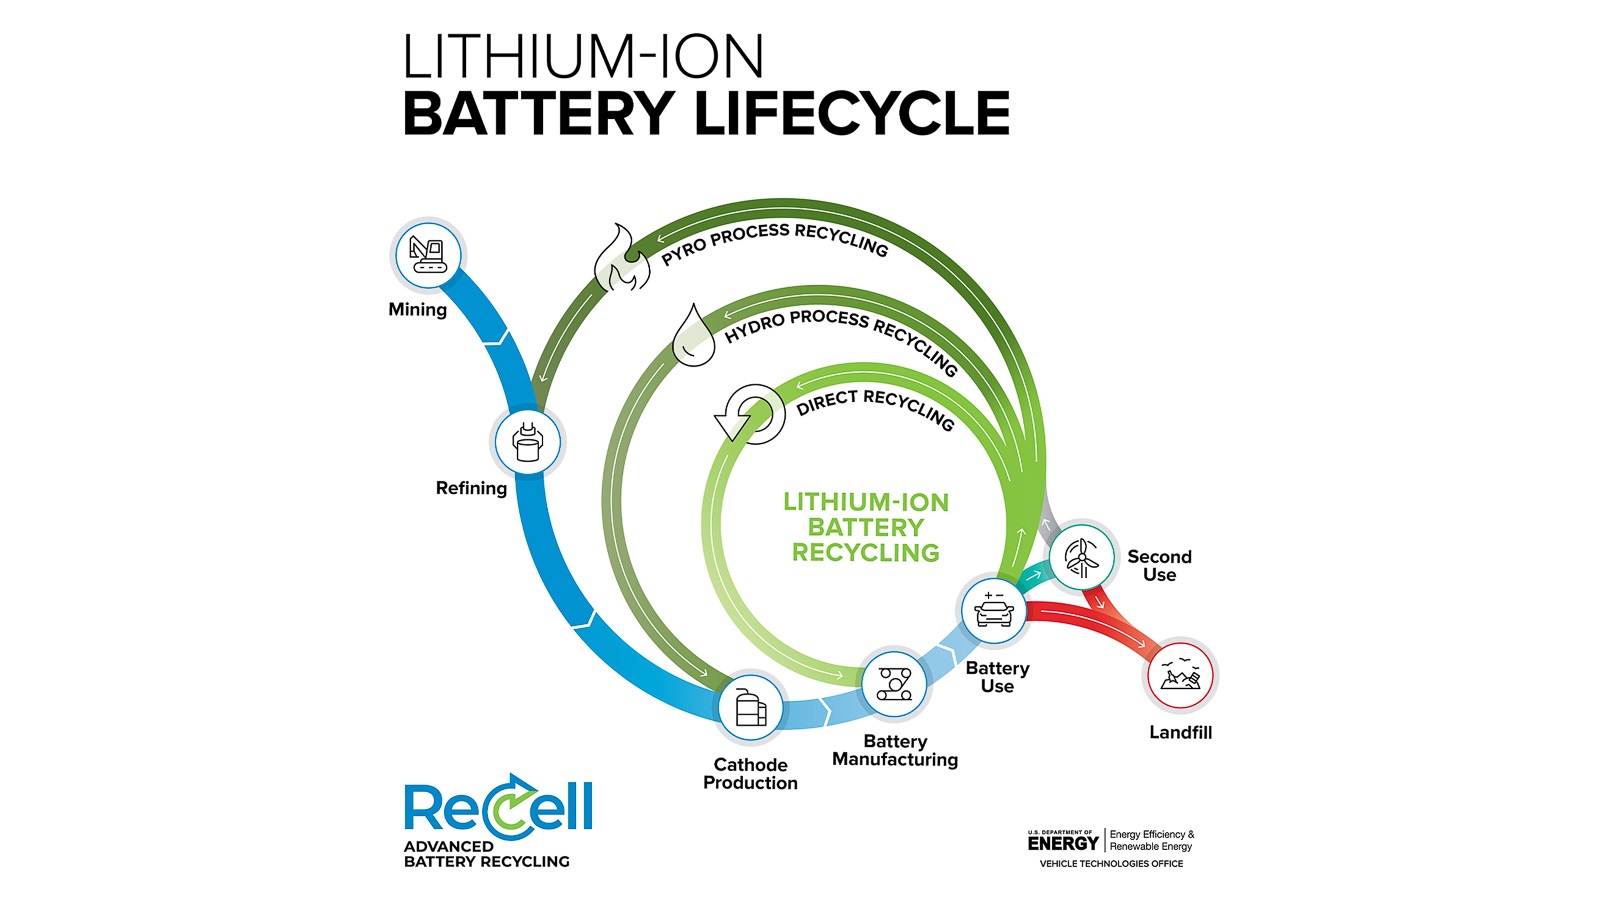 Direct recycling is the least energy-intensive method of recycling a lithium-ion battery. 